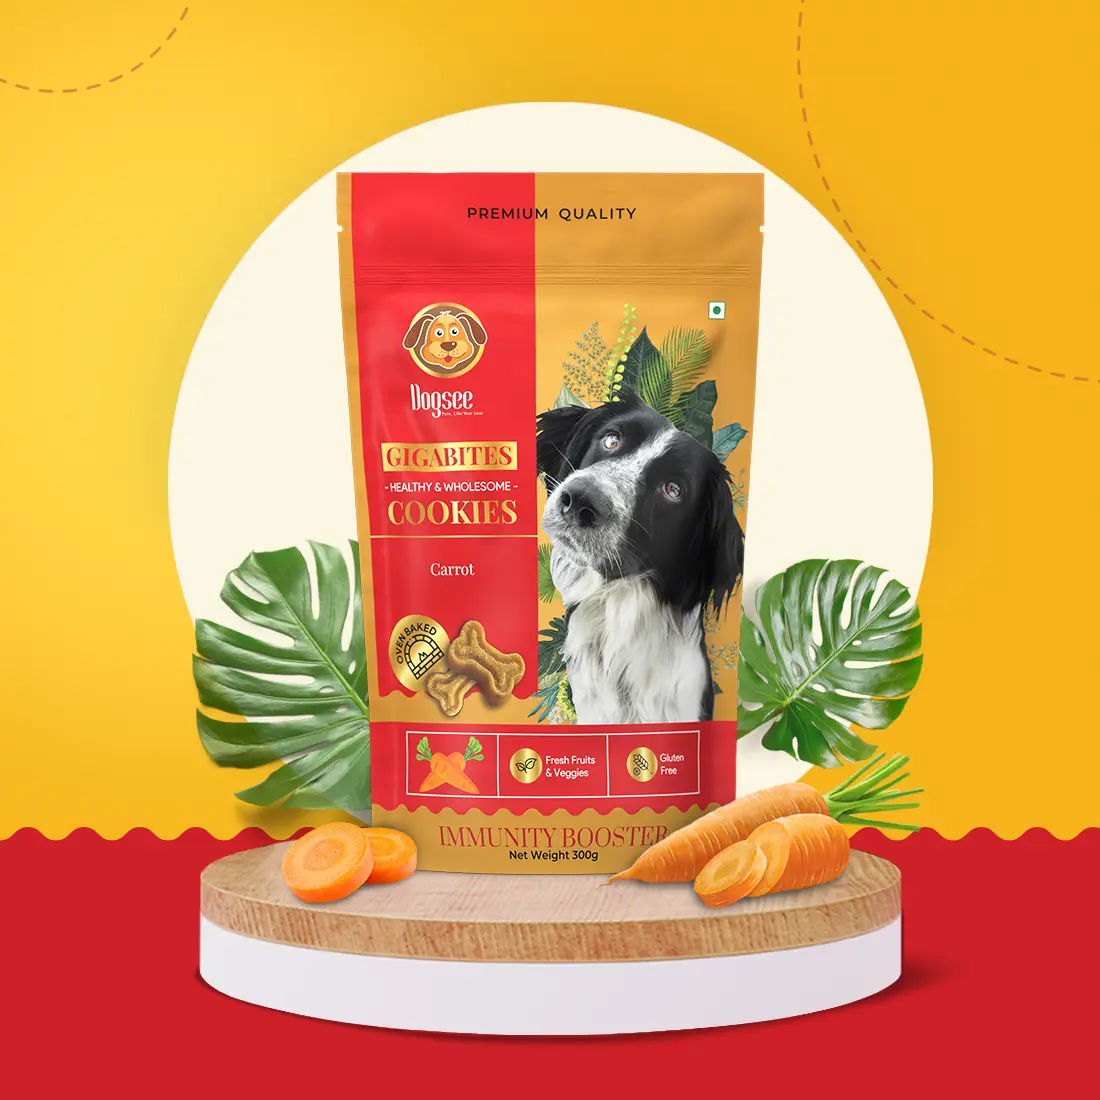 Dogsee Gigabites - Carrot Cookies for Dogs